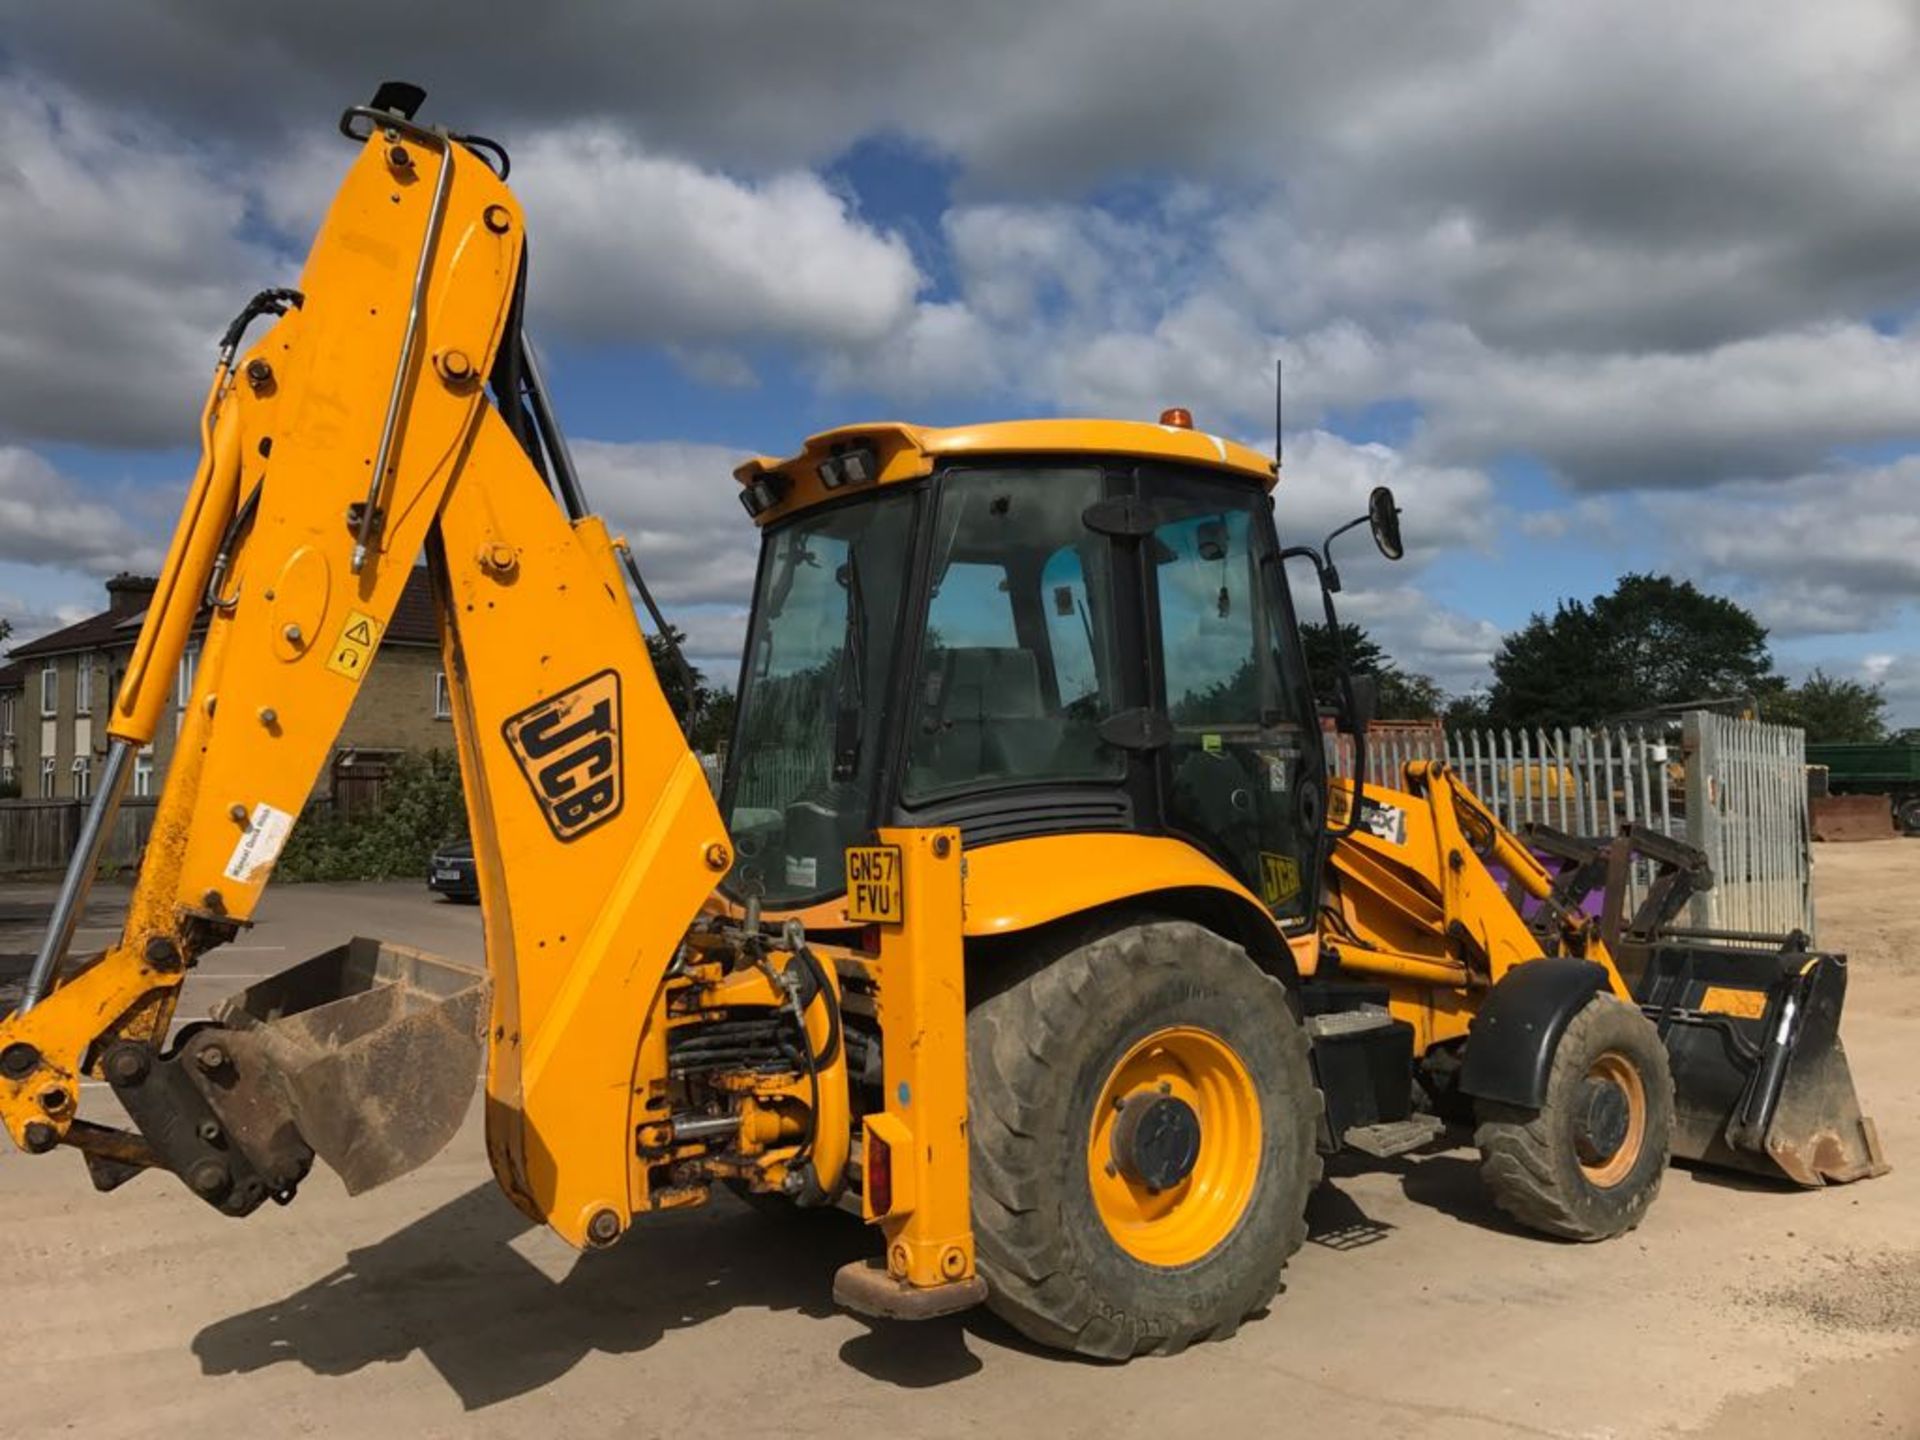 2007 JCB 3CX Digger Loader c/w extending diiper arm, piped, 4 in 1 bucket, turbo Power Shift, torque - Image 4 of 8